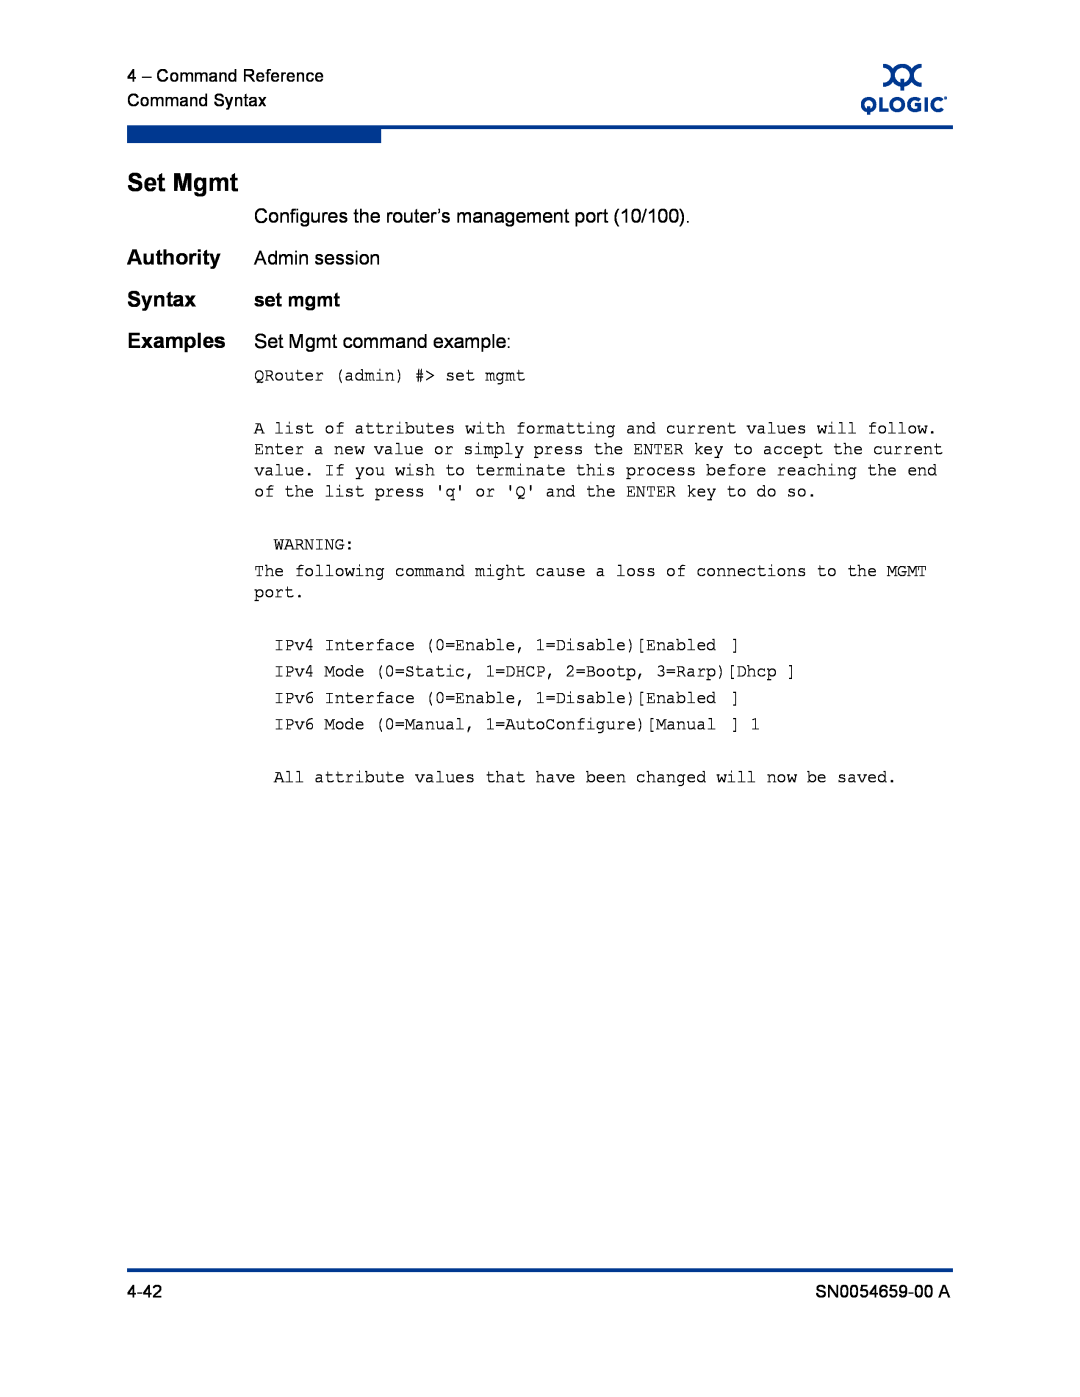 Q-Logic ISR6142 manual Set Mgmt, Authority, Syntax, Examples, set mgmt 